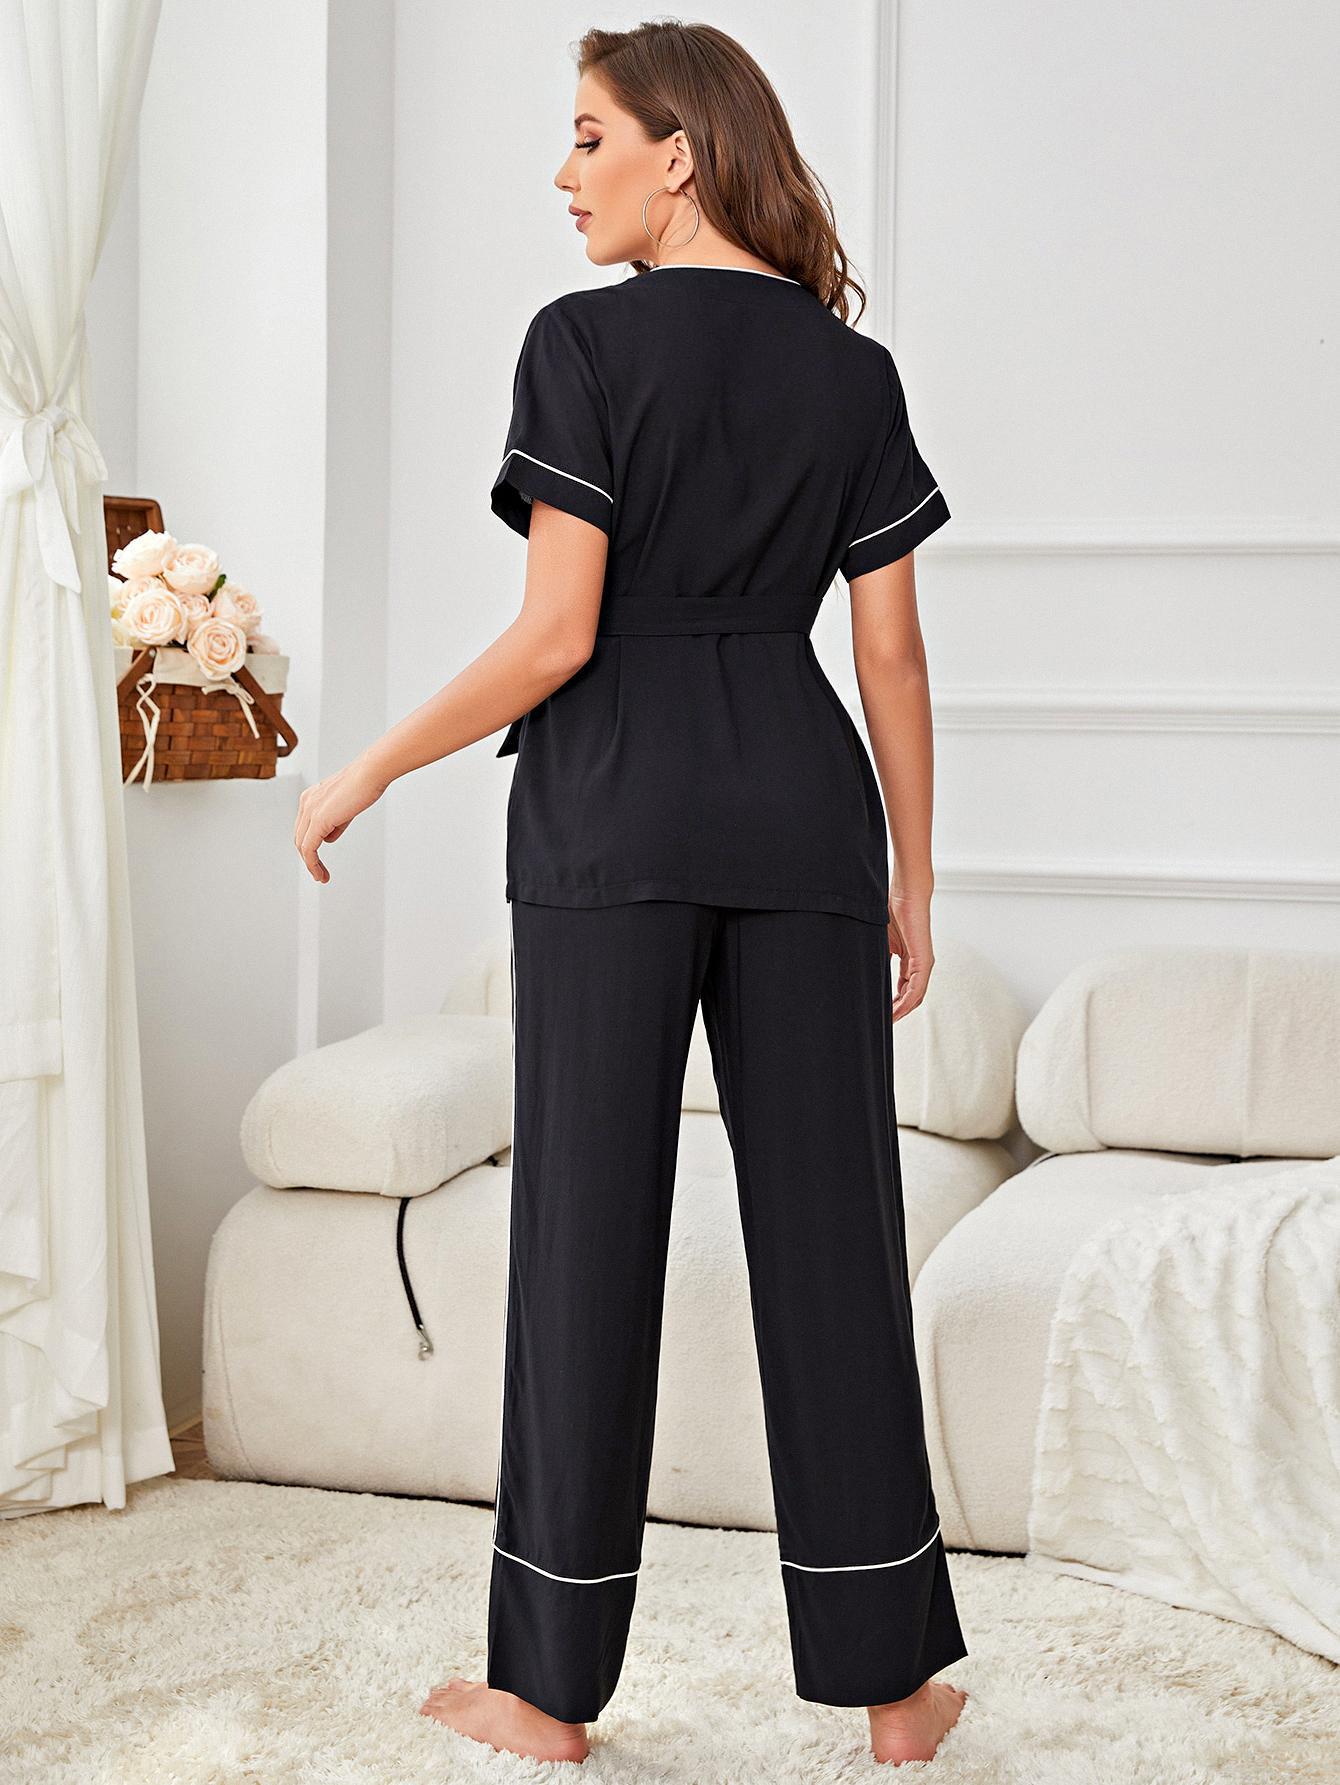 Contrast Piping Belted Top and Pants Pajama Set DromedarShop.com Online Boutique